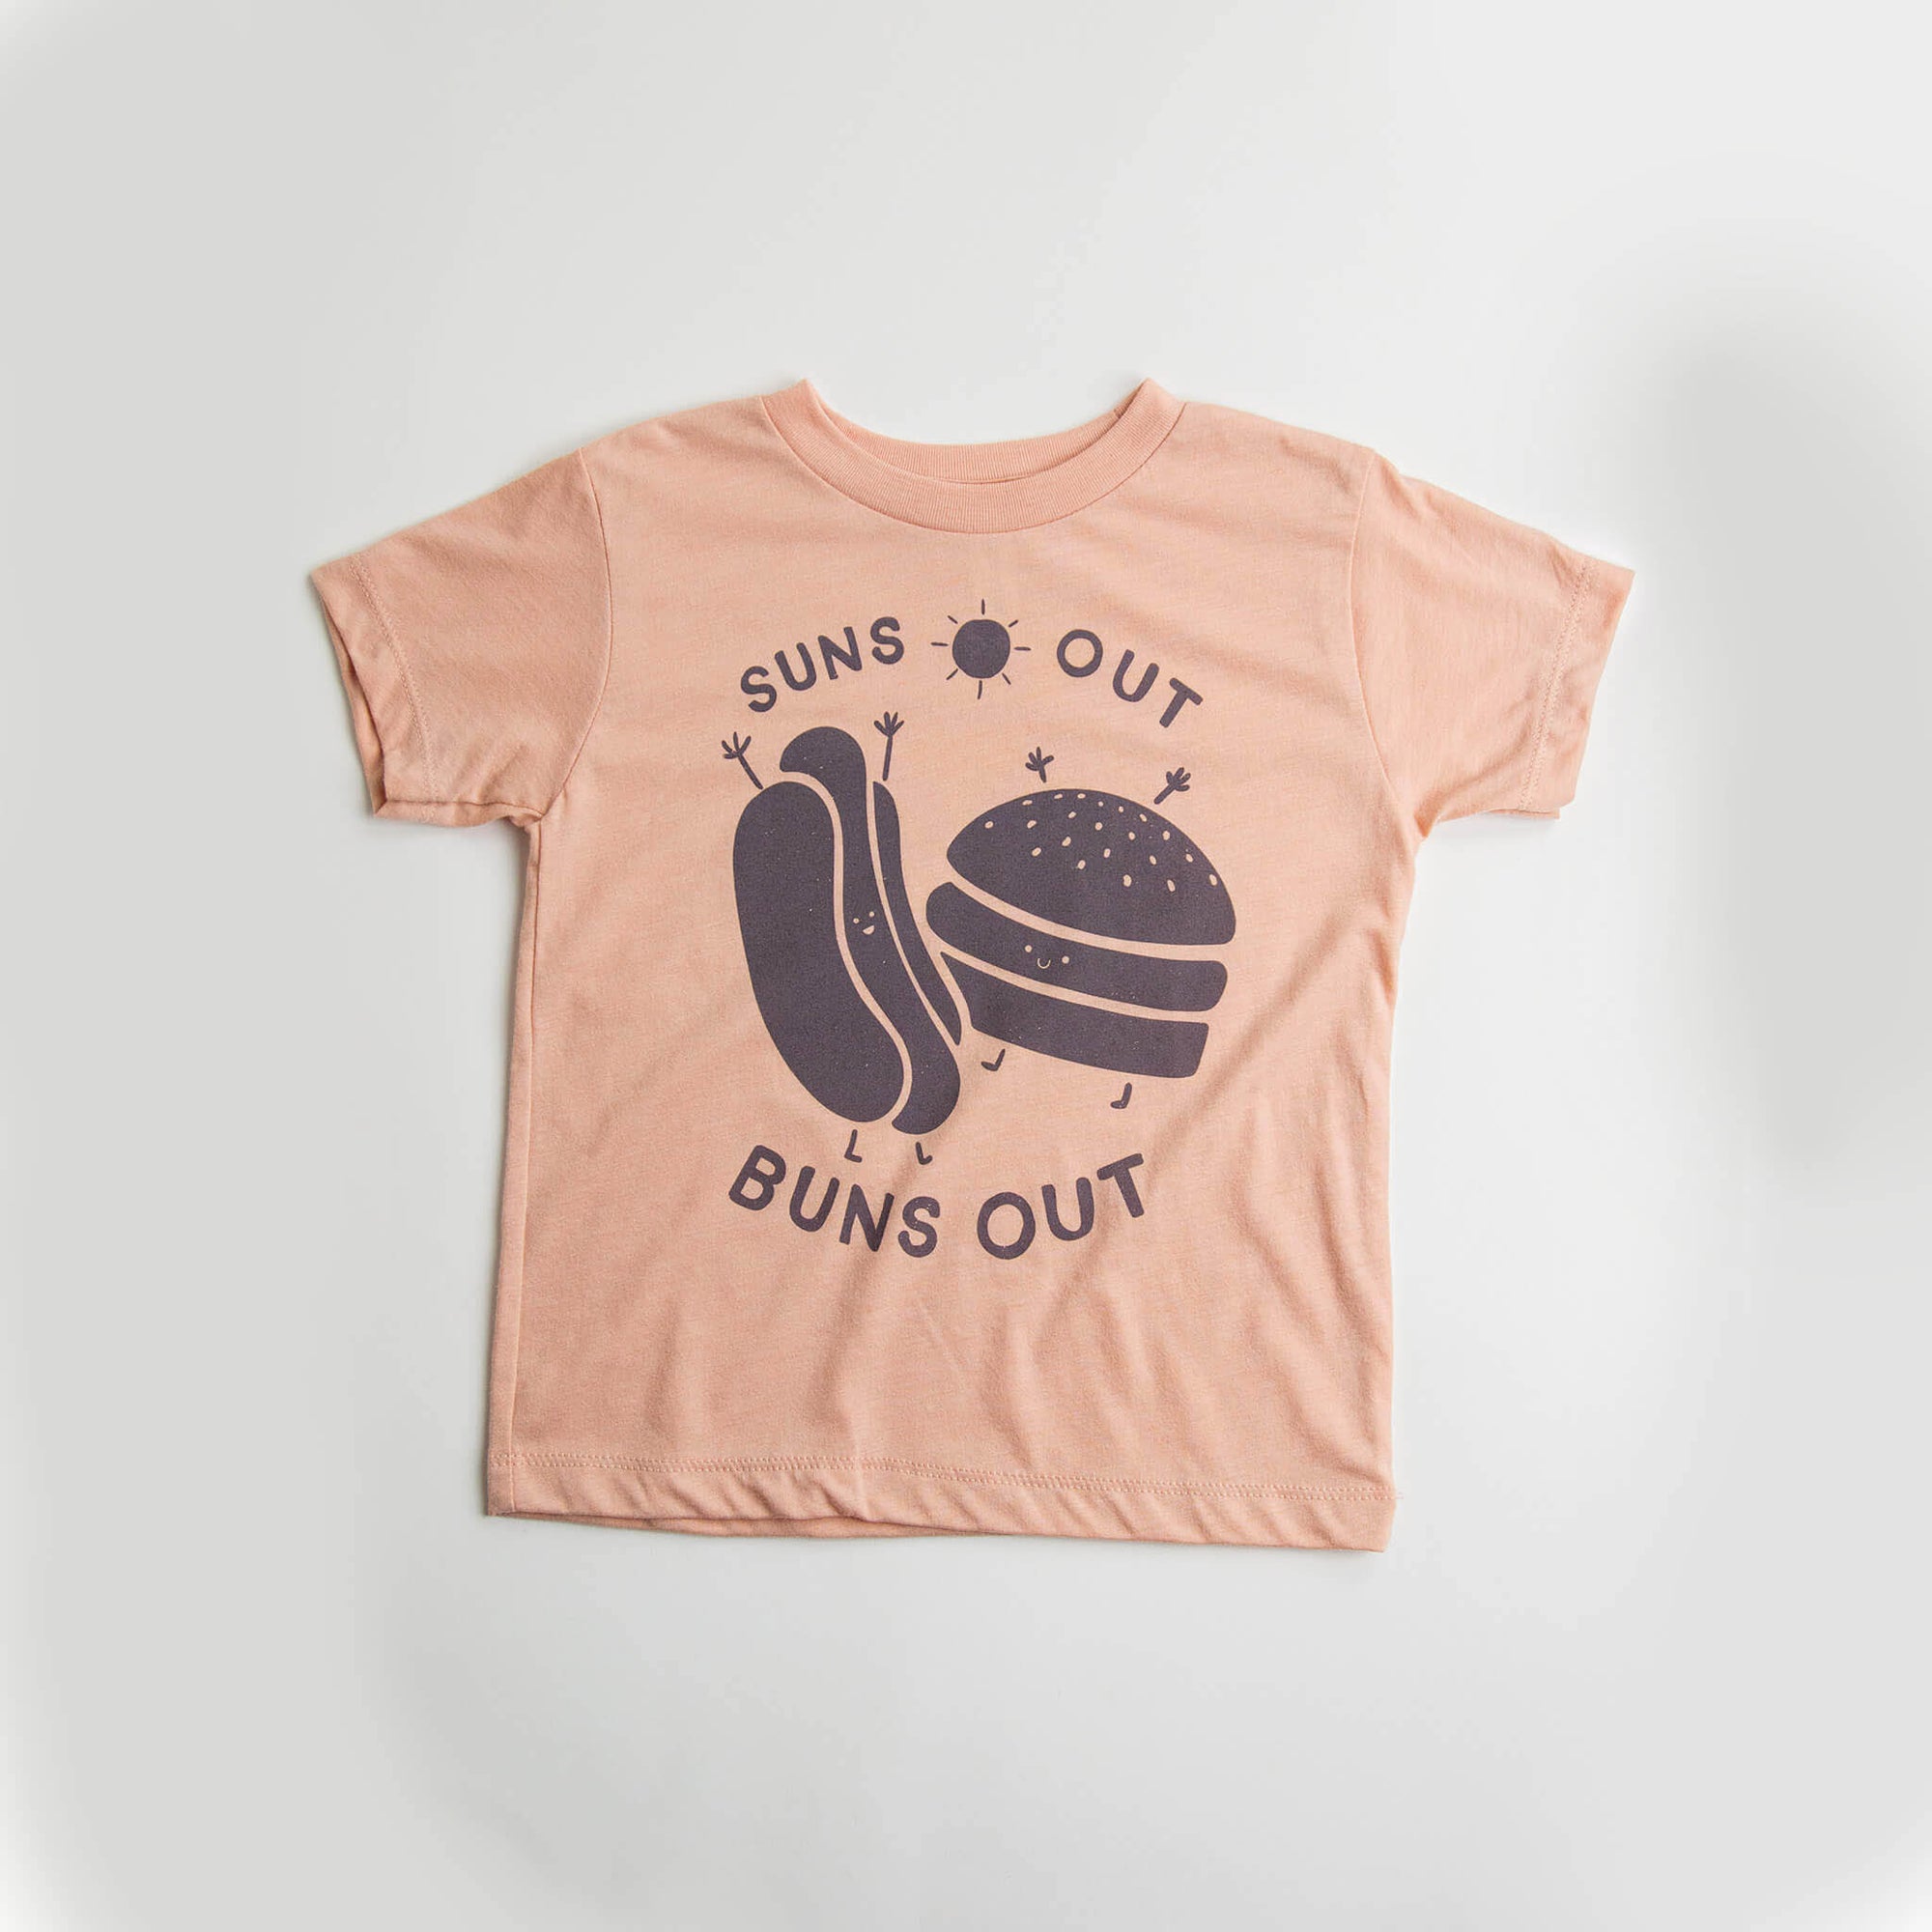 Suns Out Buns Out Toddler Tee